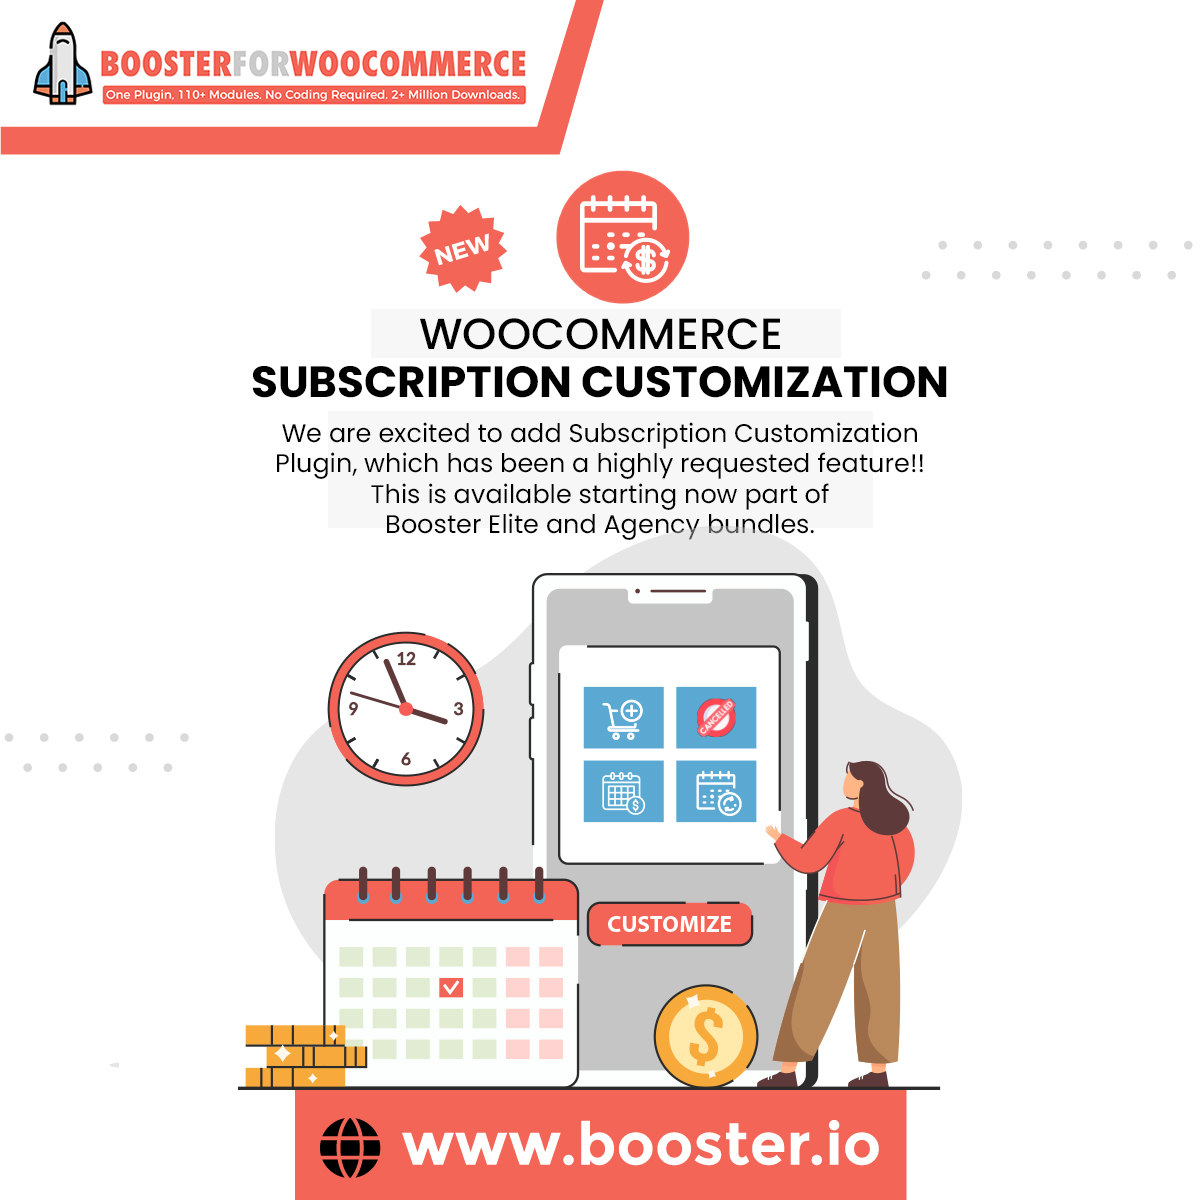 Booster For Woocommerce (@Boosterforwoo) / Twitter